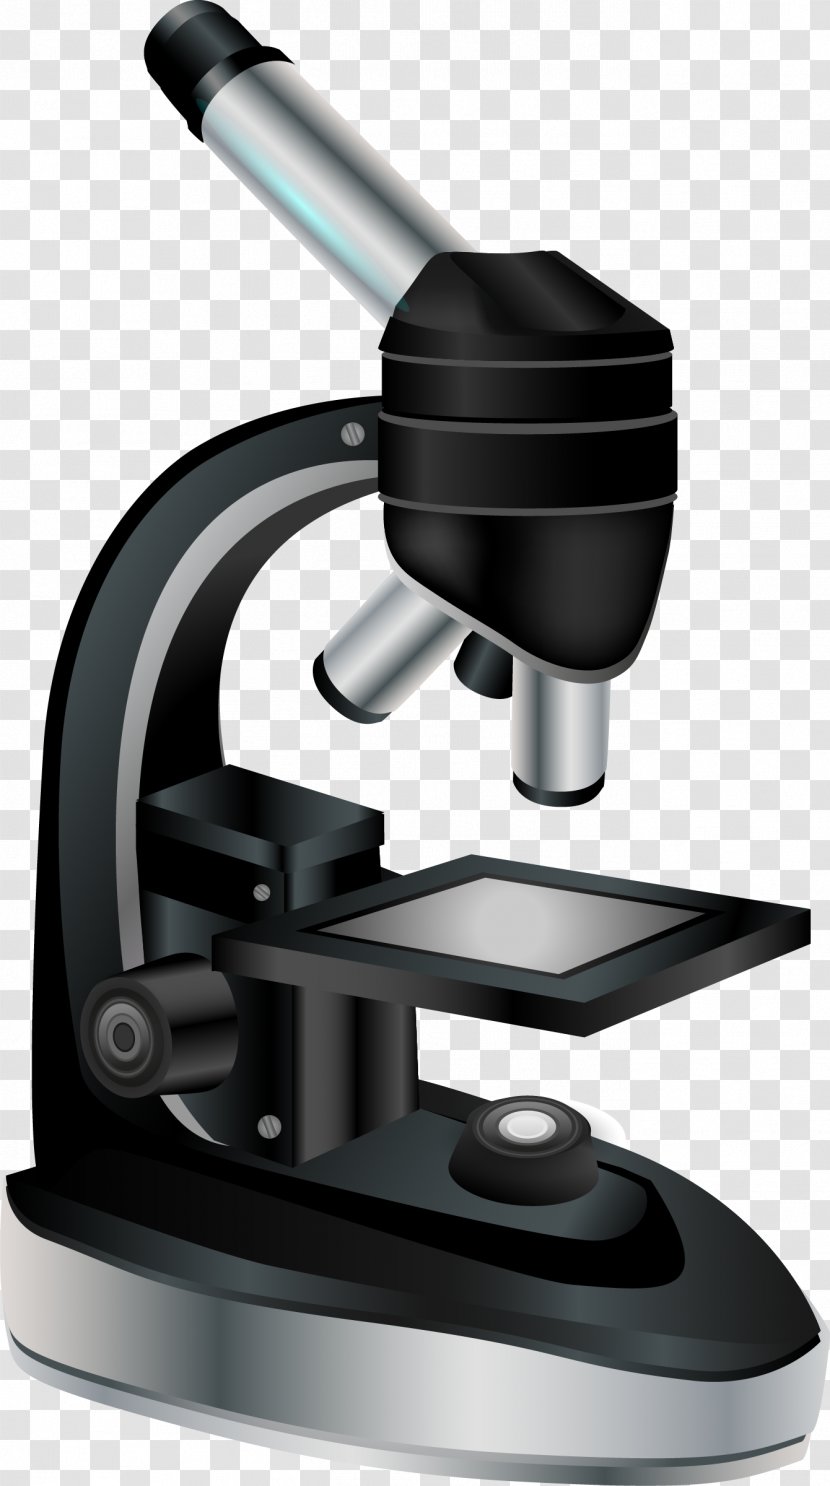 Microscope Download - Vector Transparent PNG